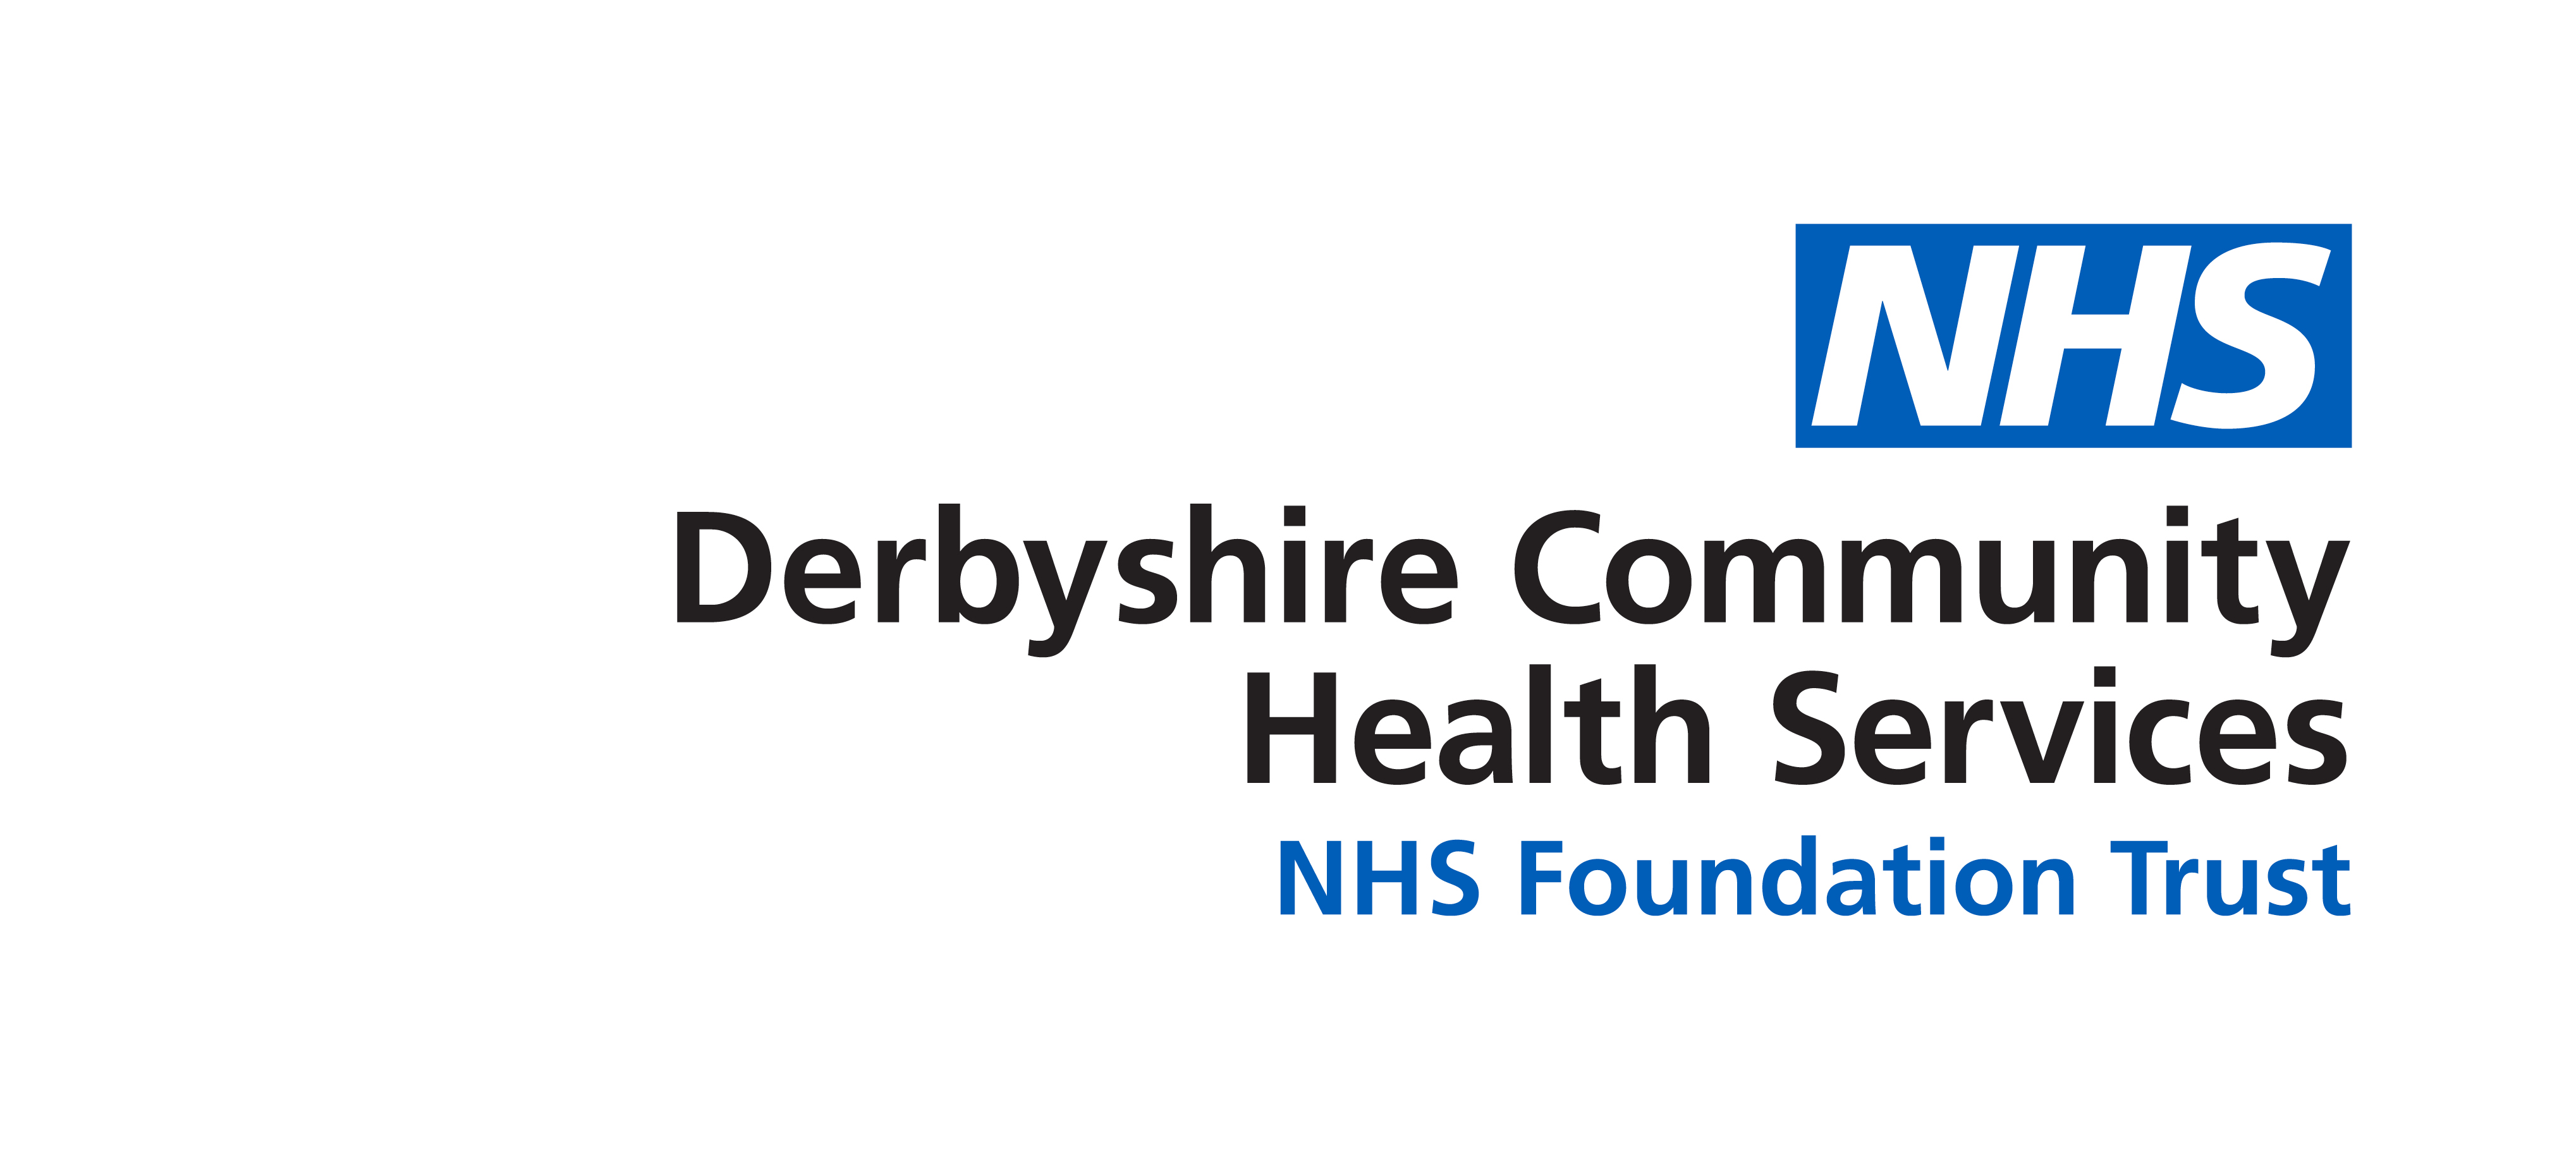 Derbyshire Community Health Services NHS Foundation Trust – Non-Executive Director